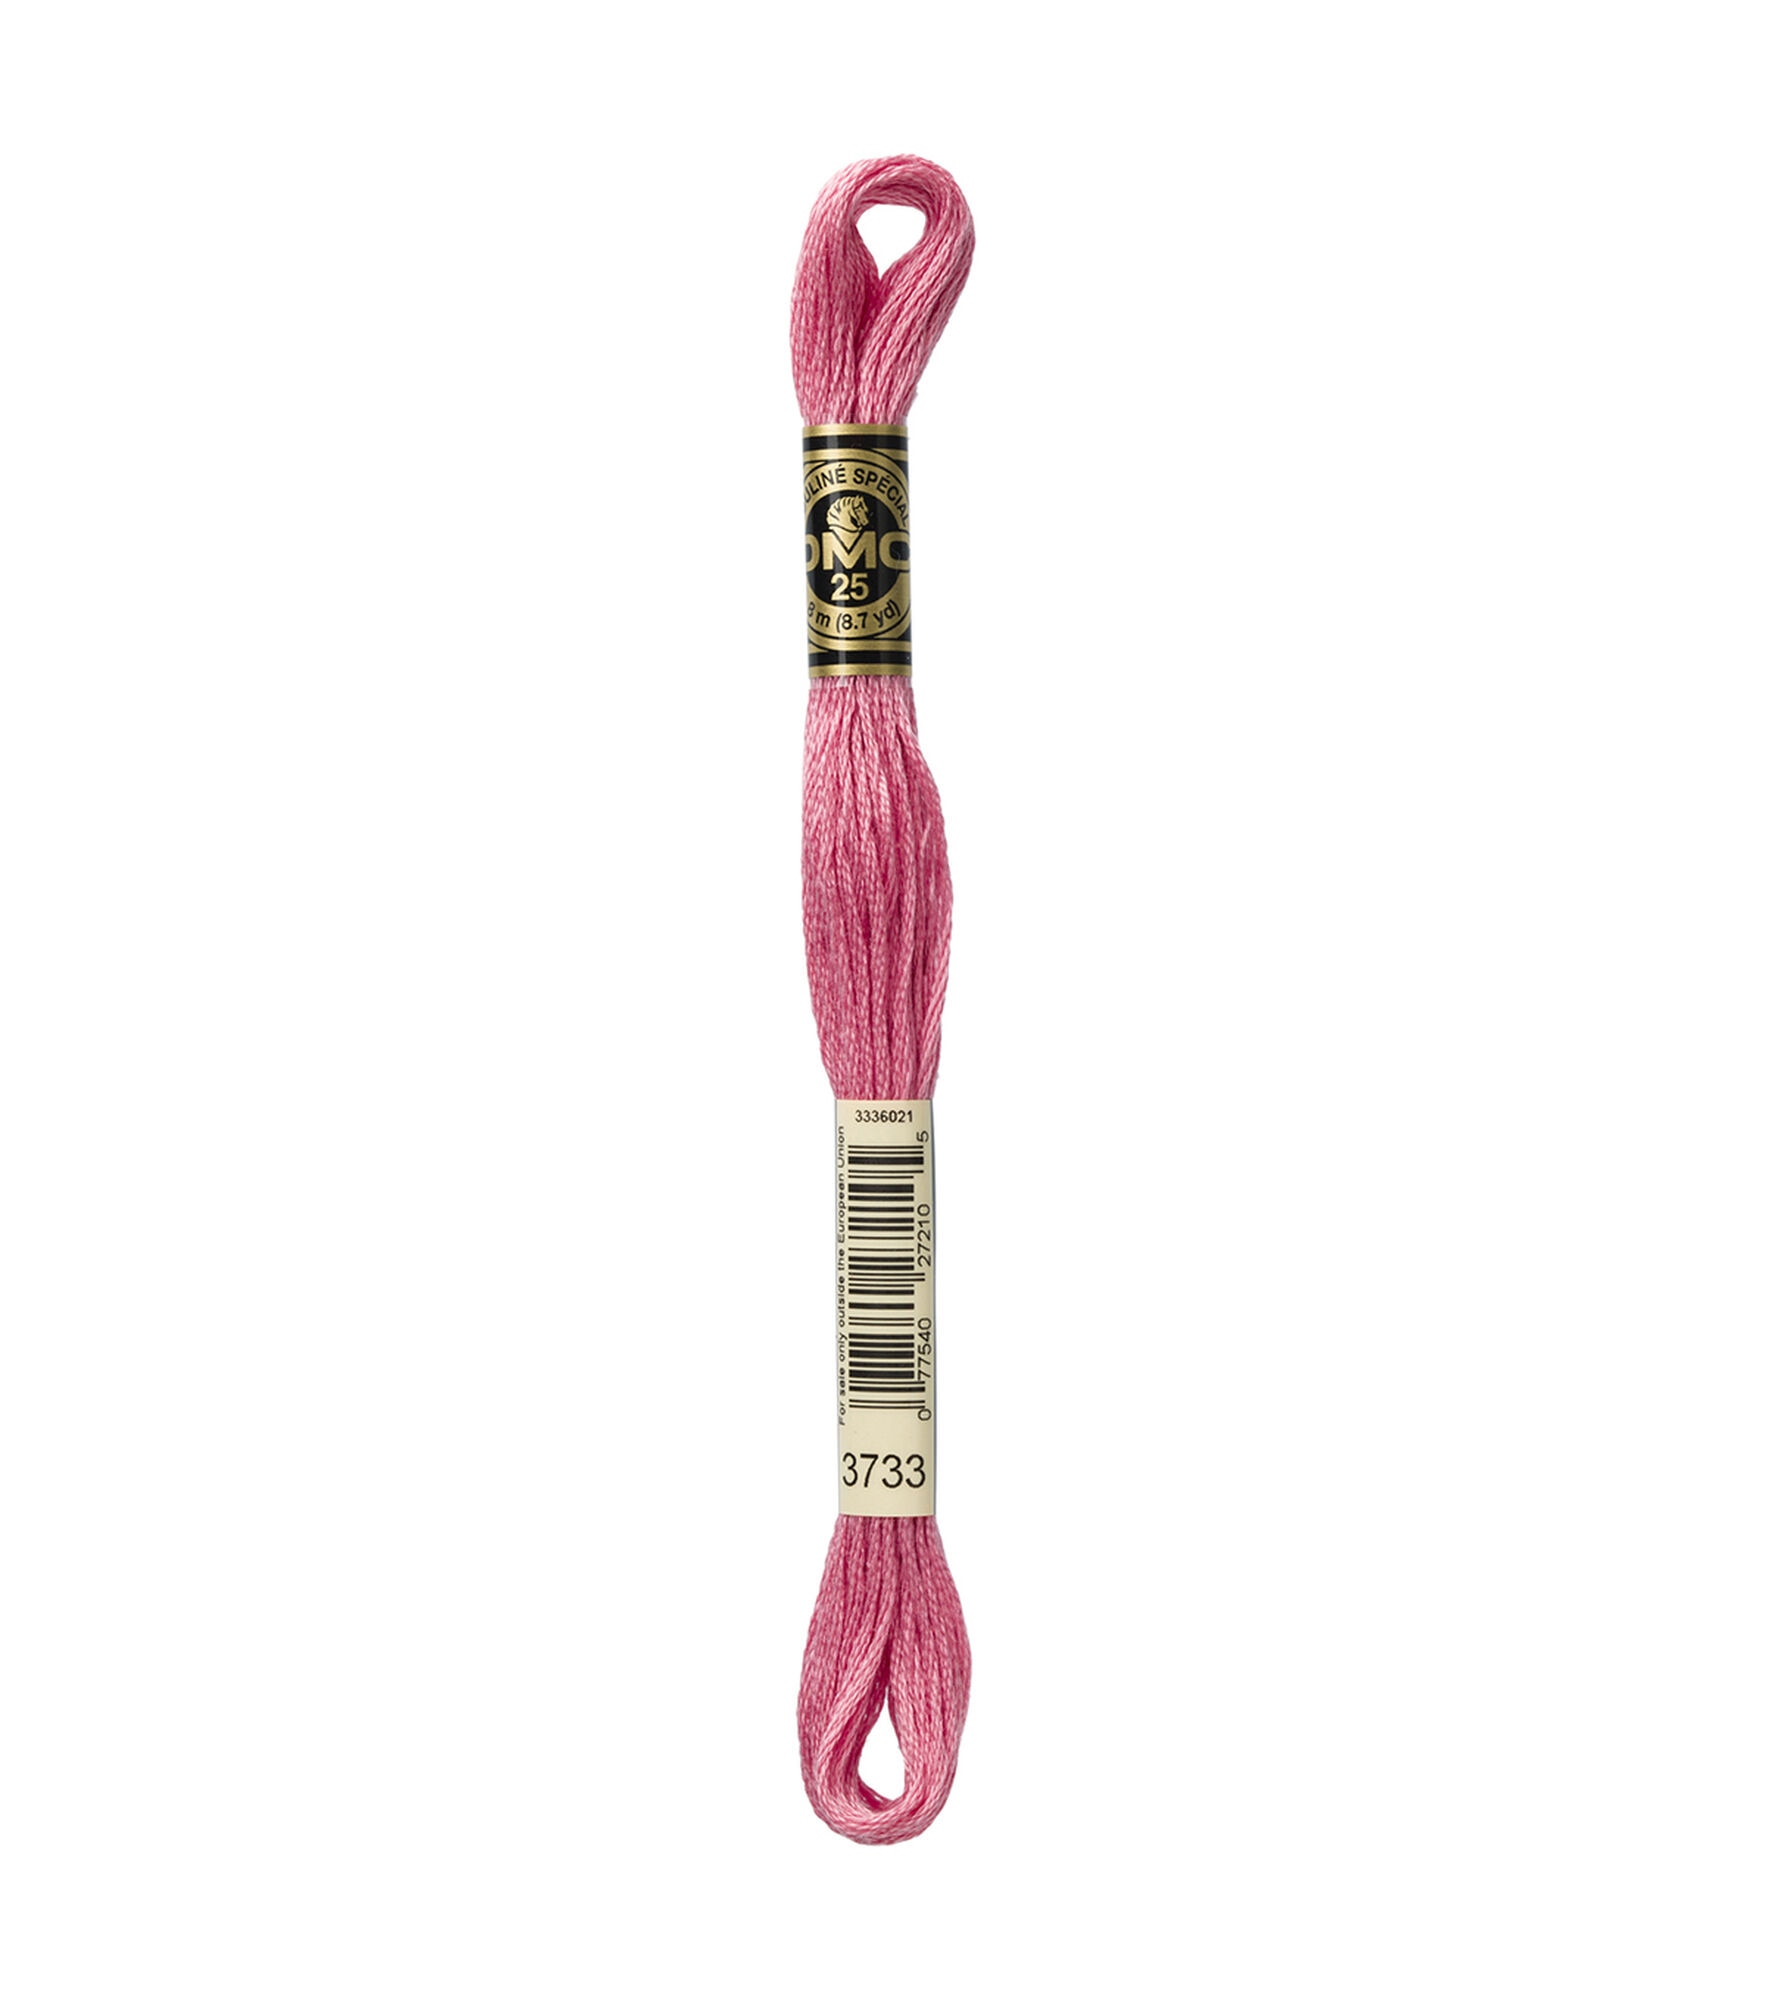 DMC 8.7yd Pink 6 Strand Cotton Embroidery Floss, 3733 Dusty Rose, hi-res